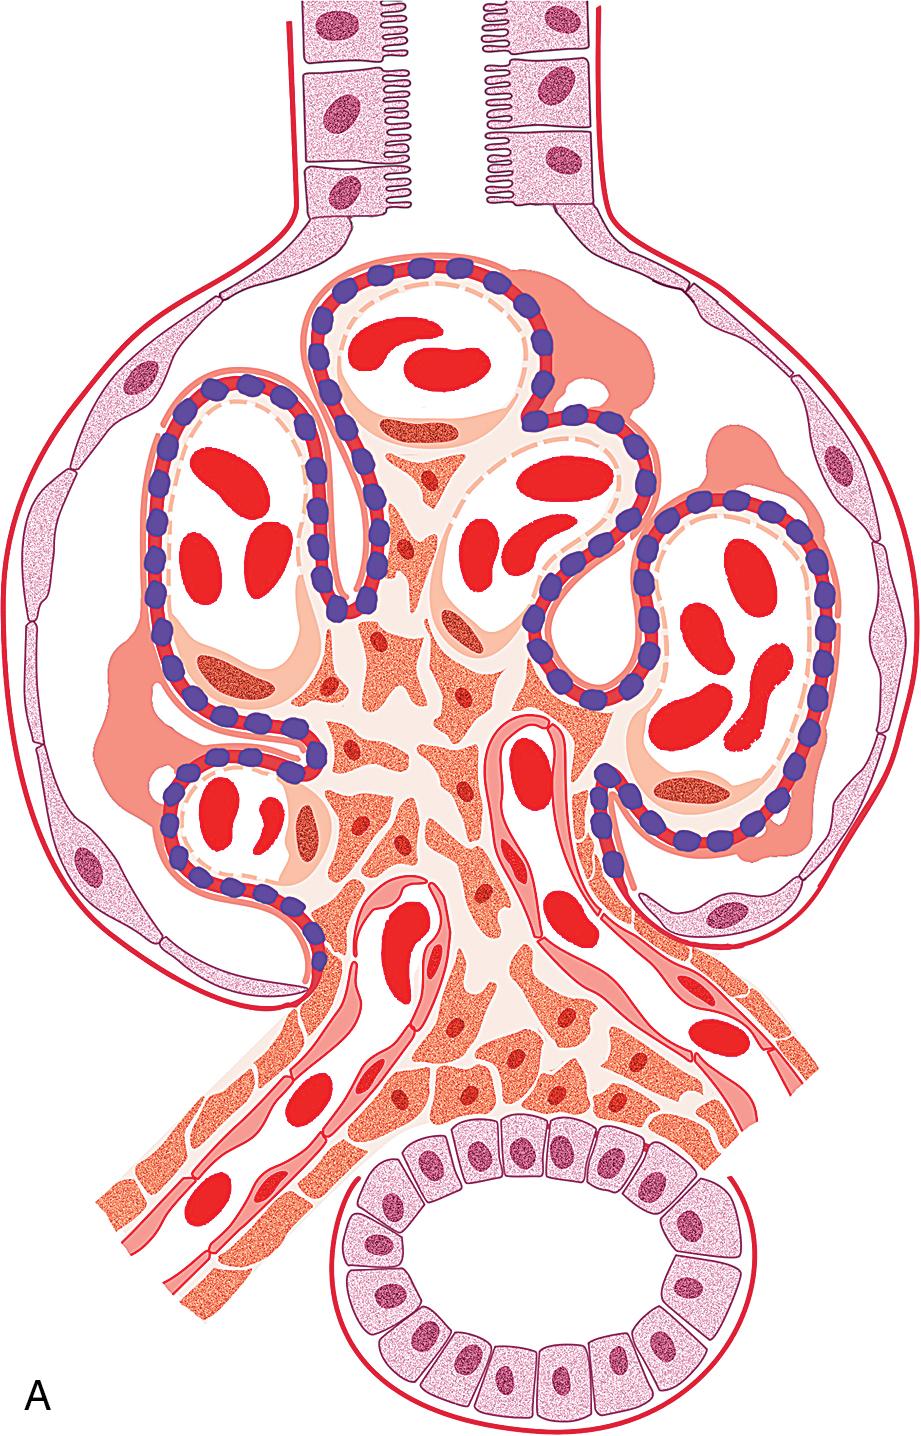 FIG. 3.70, Membranous nephropathy.